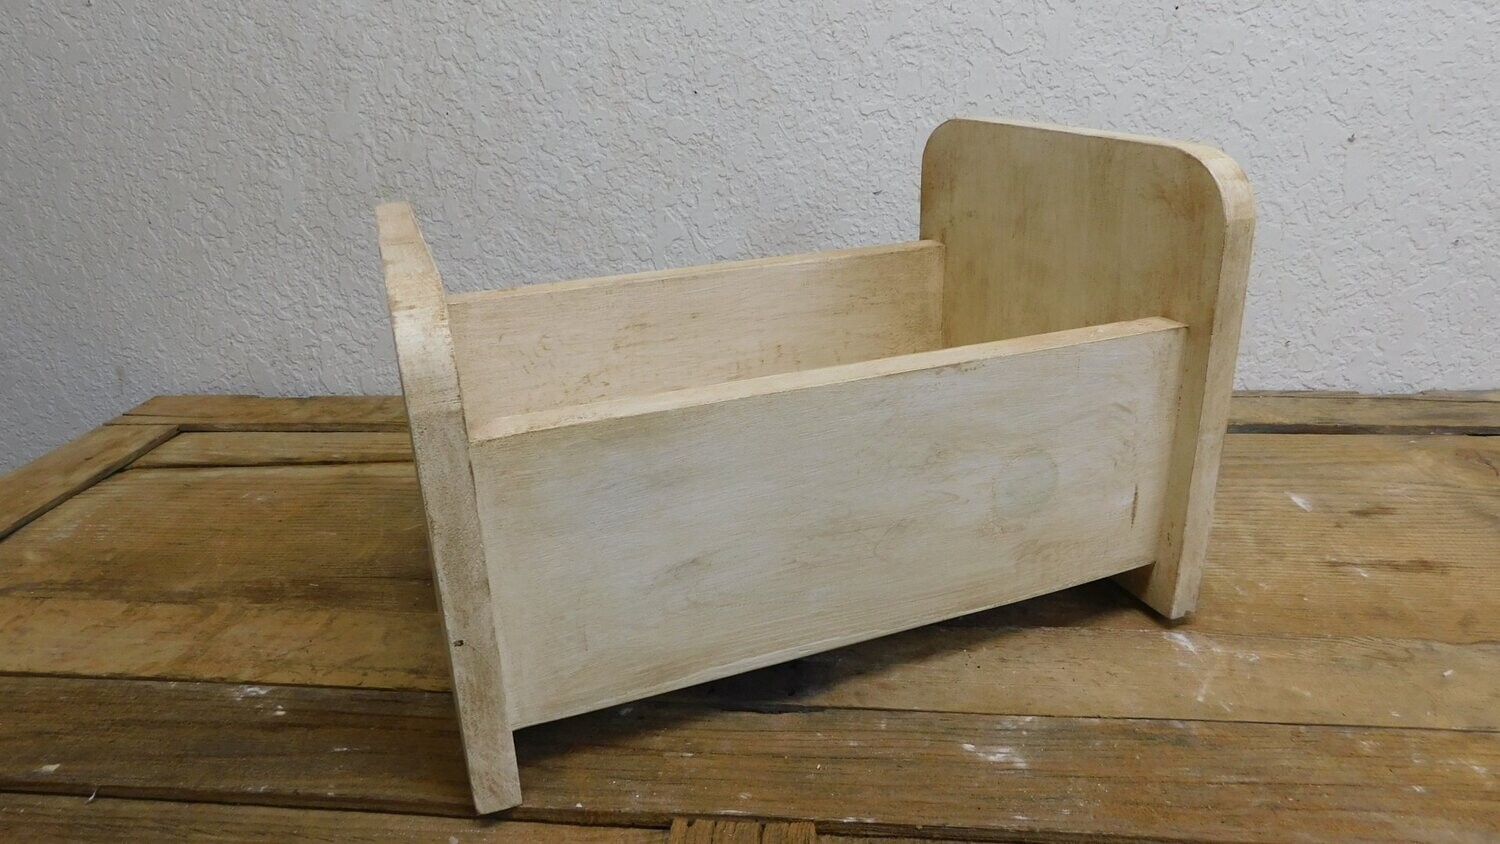 BB Bed-Newborn Prop-Handmade-Wood-15.5x11x10H inches-CLEARANCE